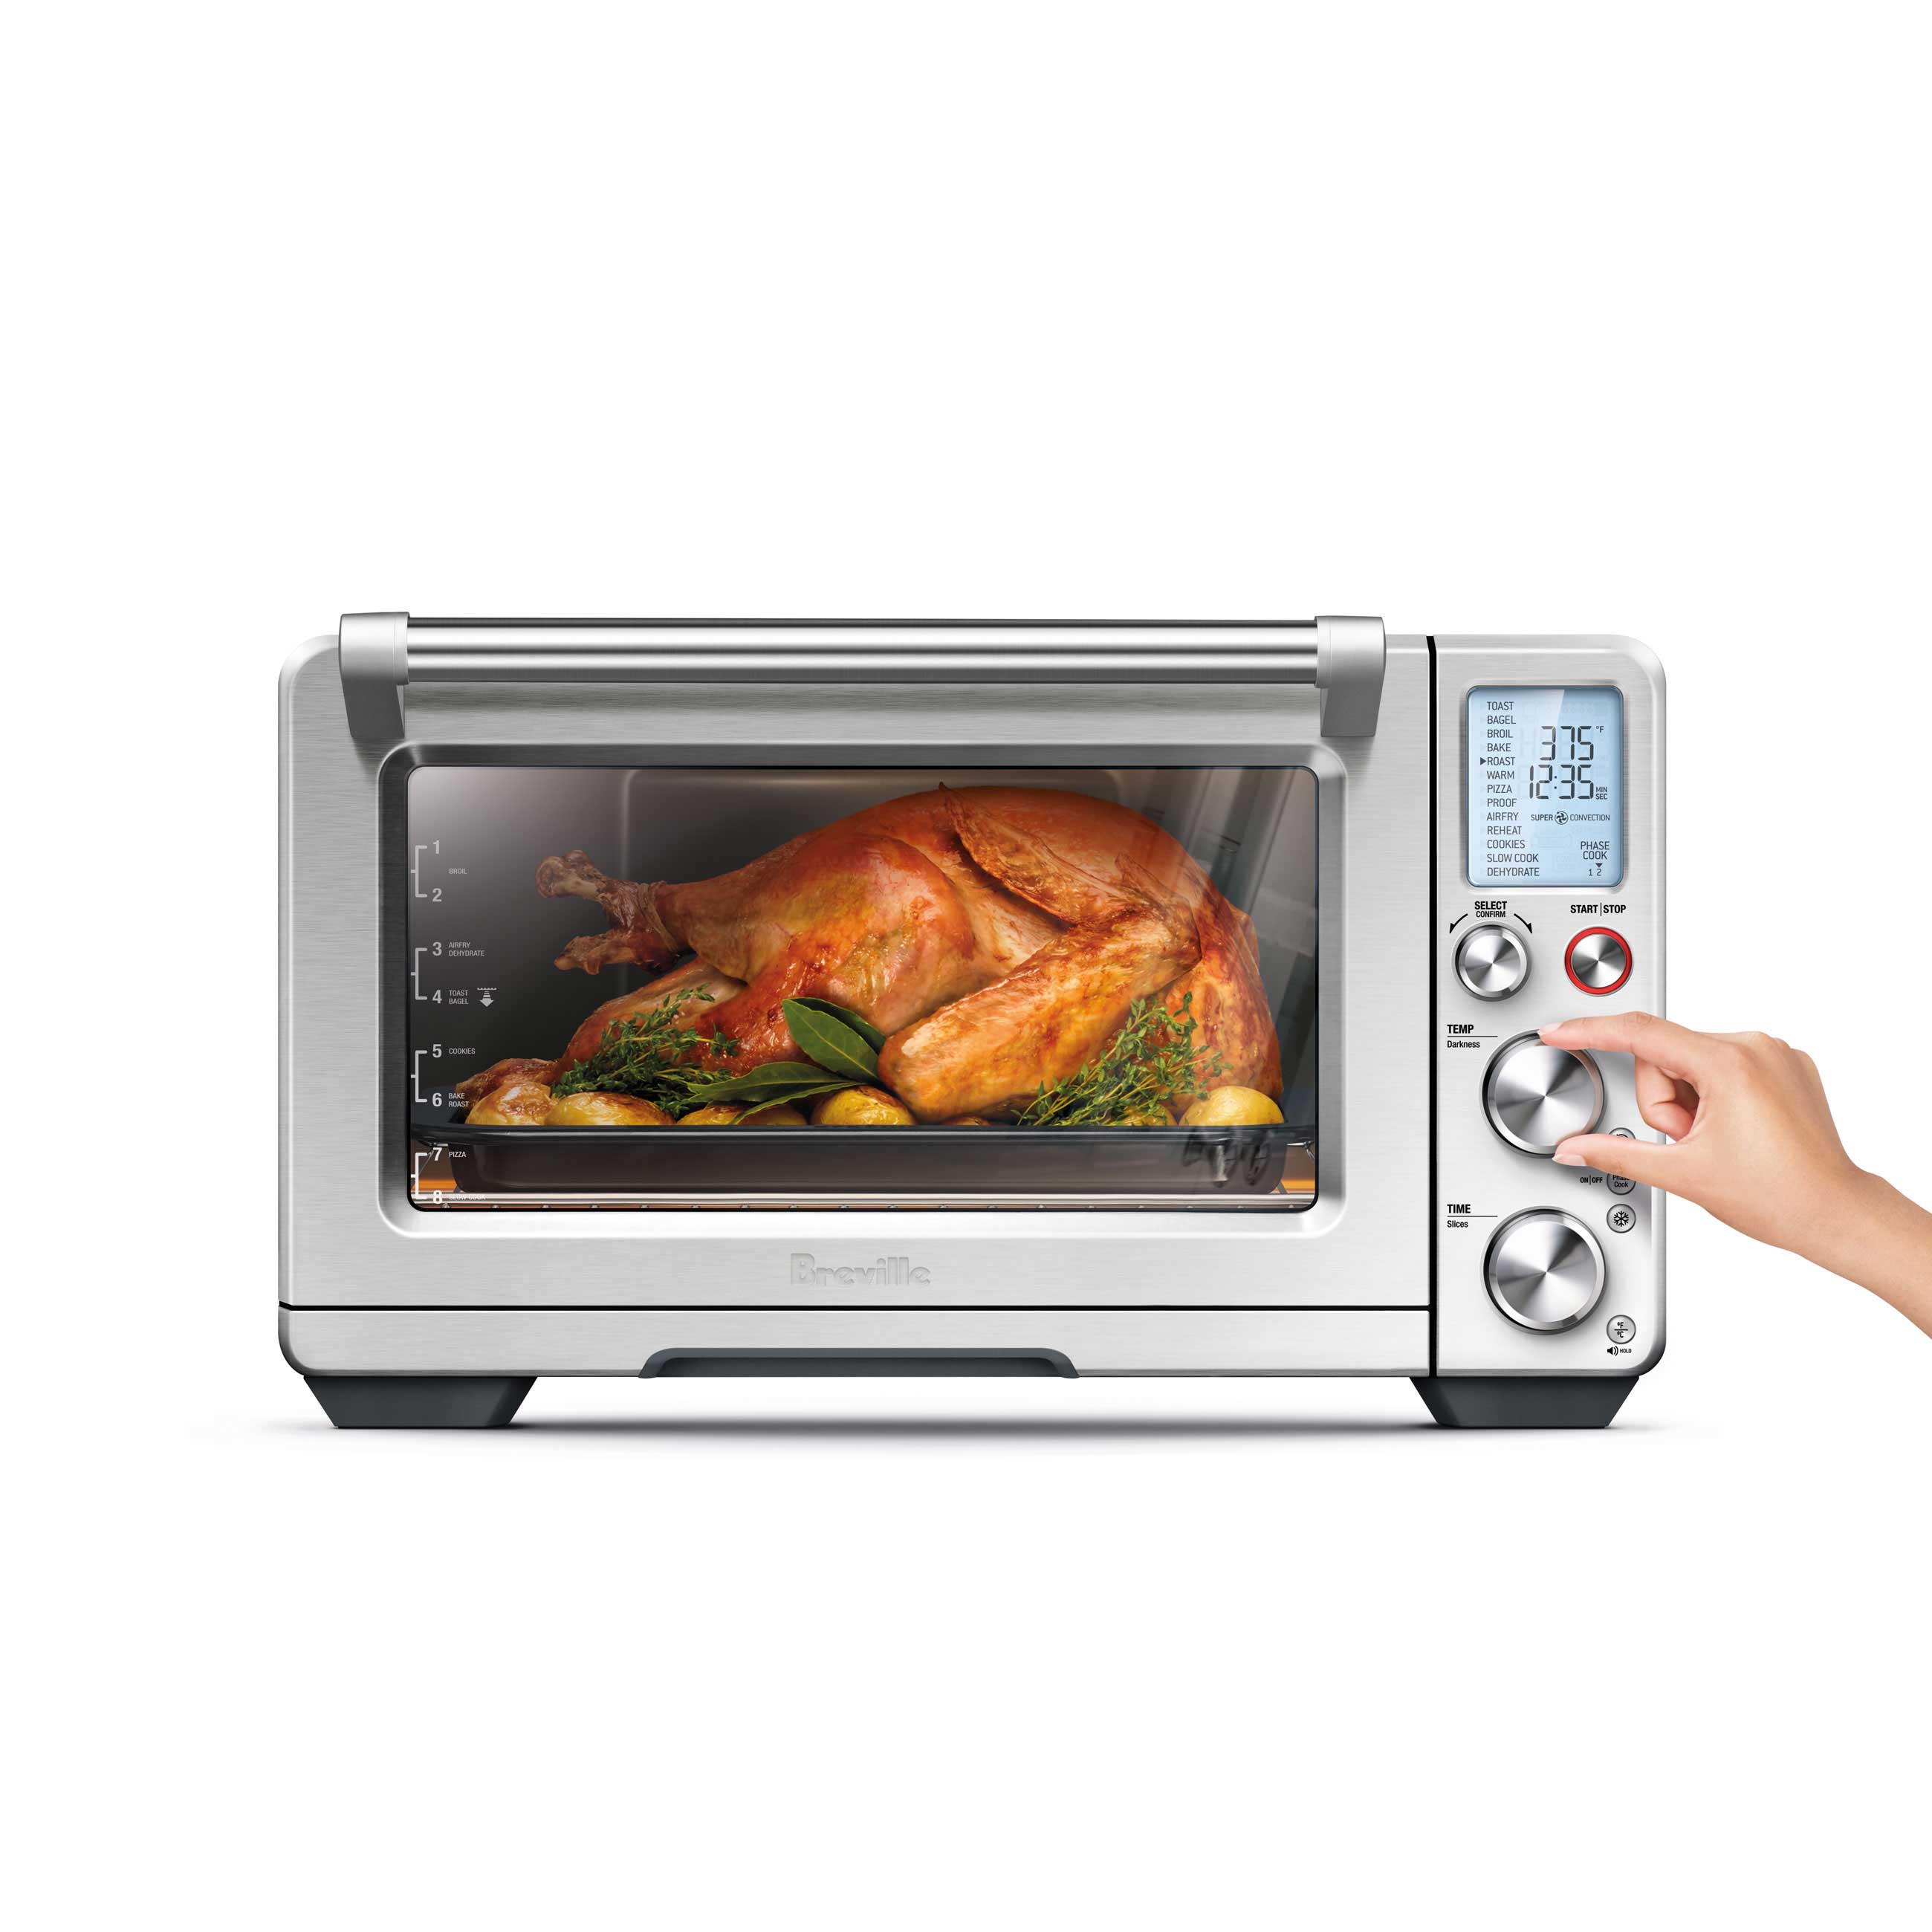 The Smart Oven Air Breville